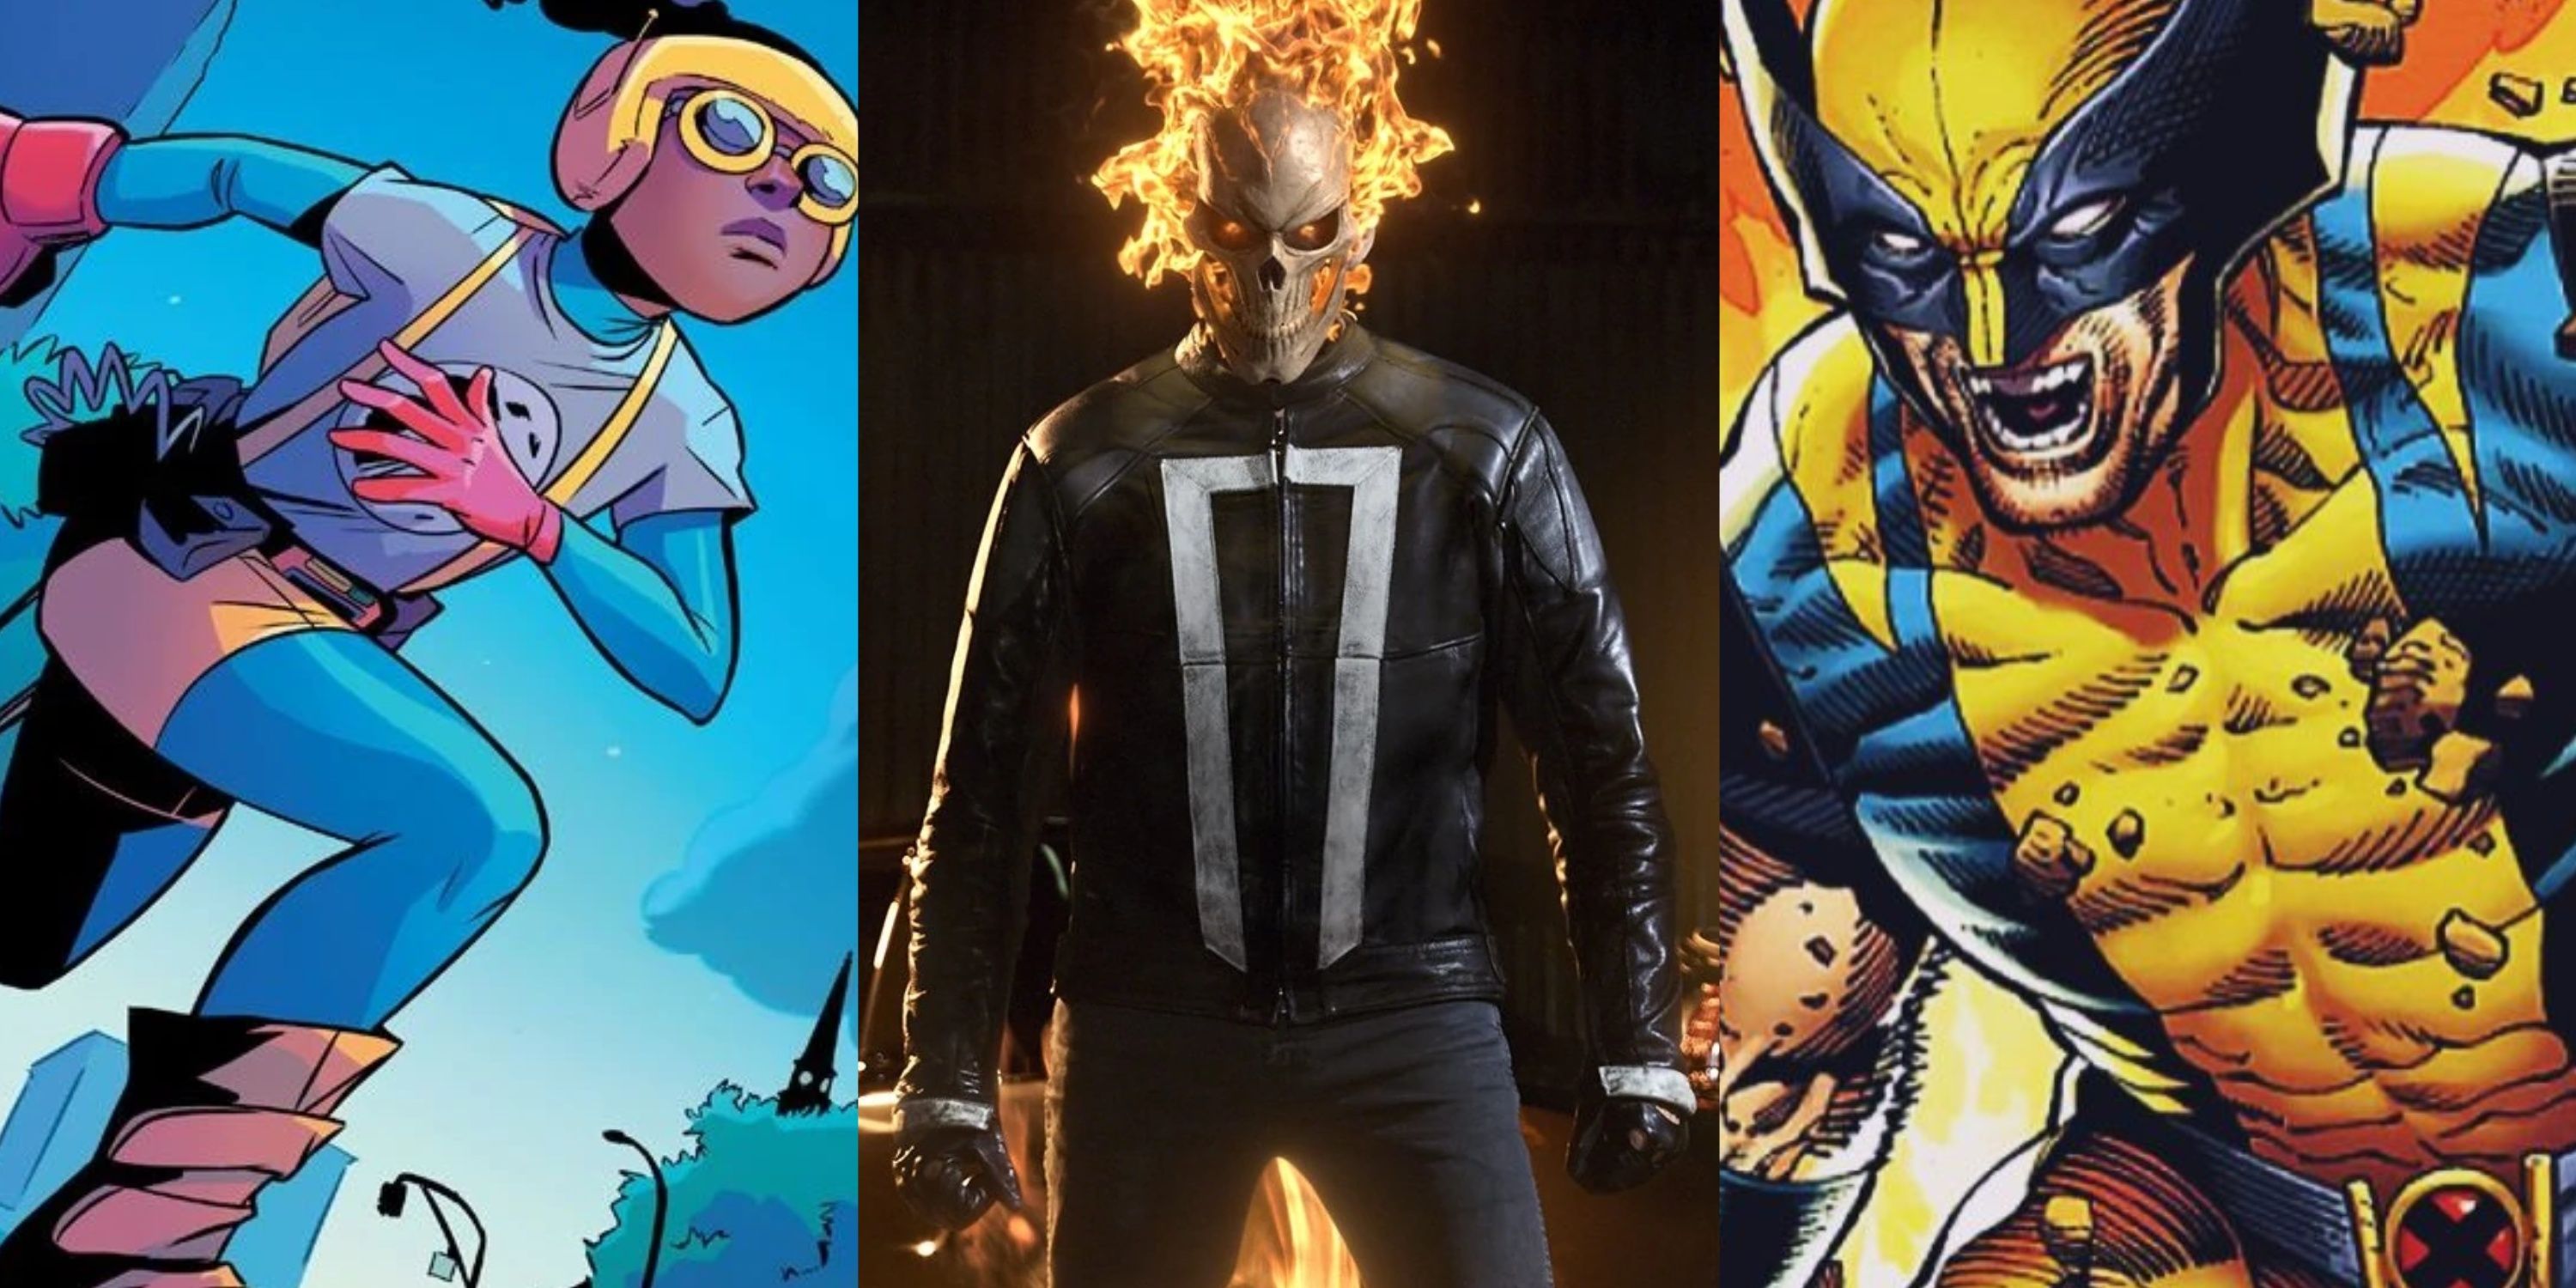 Split image of Moon Girl and Wolverine from Marvel Comics, Ghost Rider from Agents of SHIELD